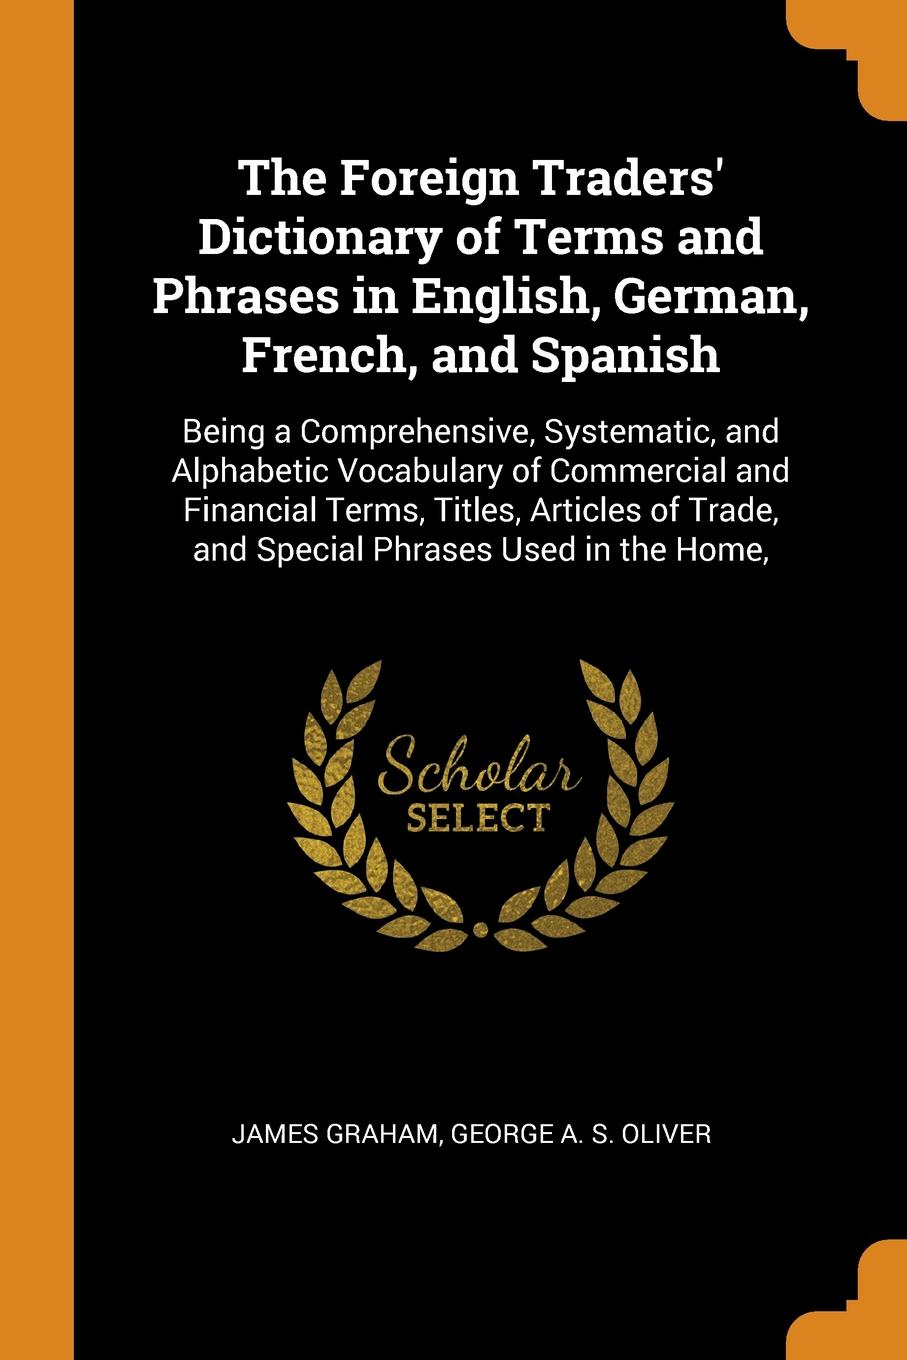 The Foreign Traders` Dictionary of Terms and Phrases in English, German, French, and Spanish. Being a Comprehensive, Systematic, and Alphabetic Vocabulary of Commercial and Financial Terms, Titles, Articles of Trade, and Special Phrases Used in th...